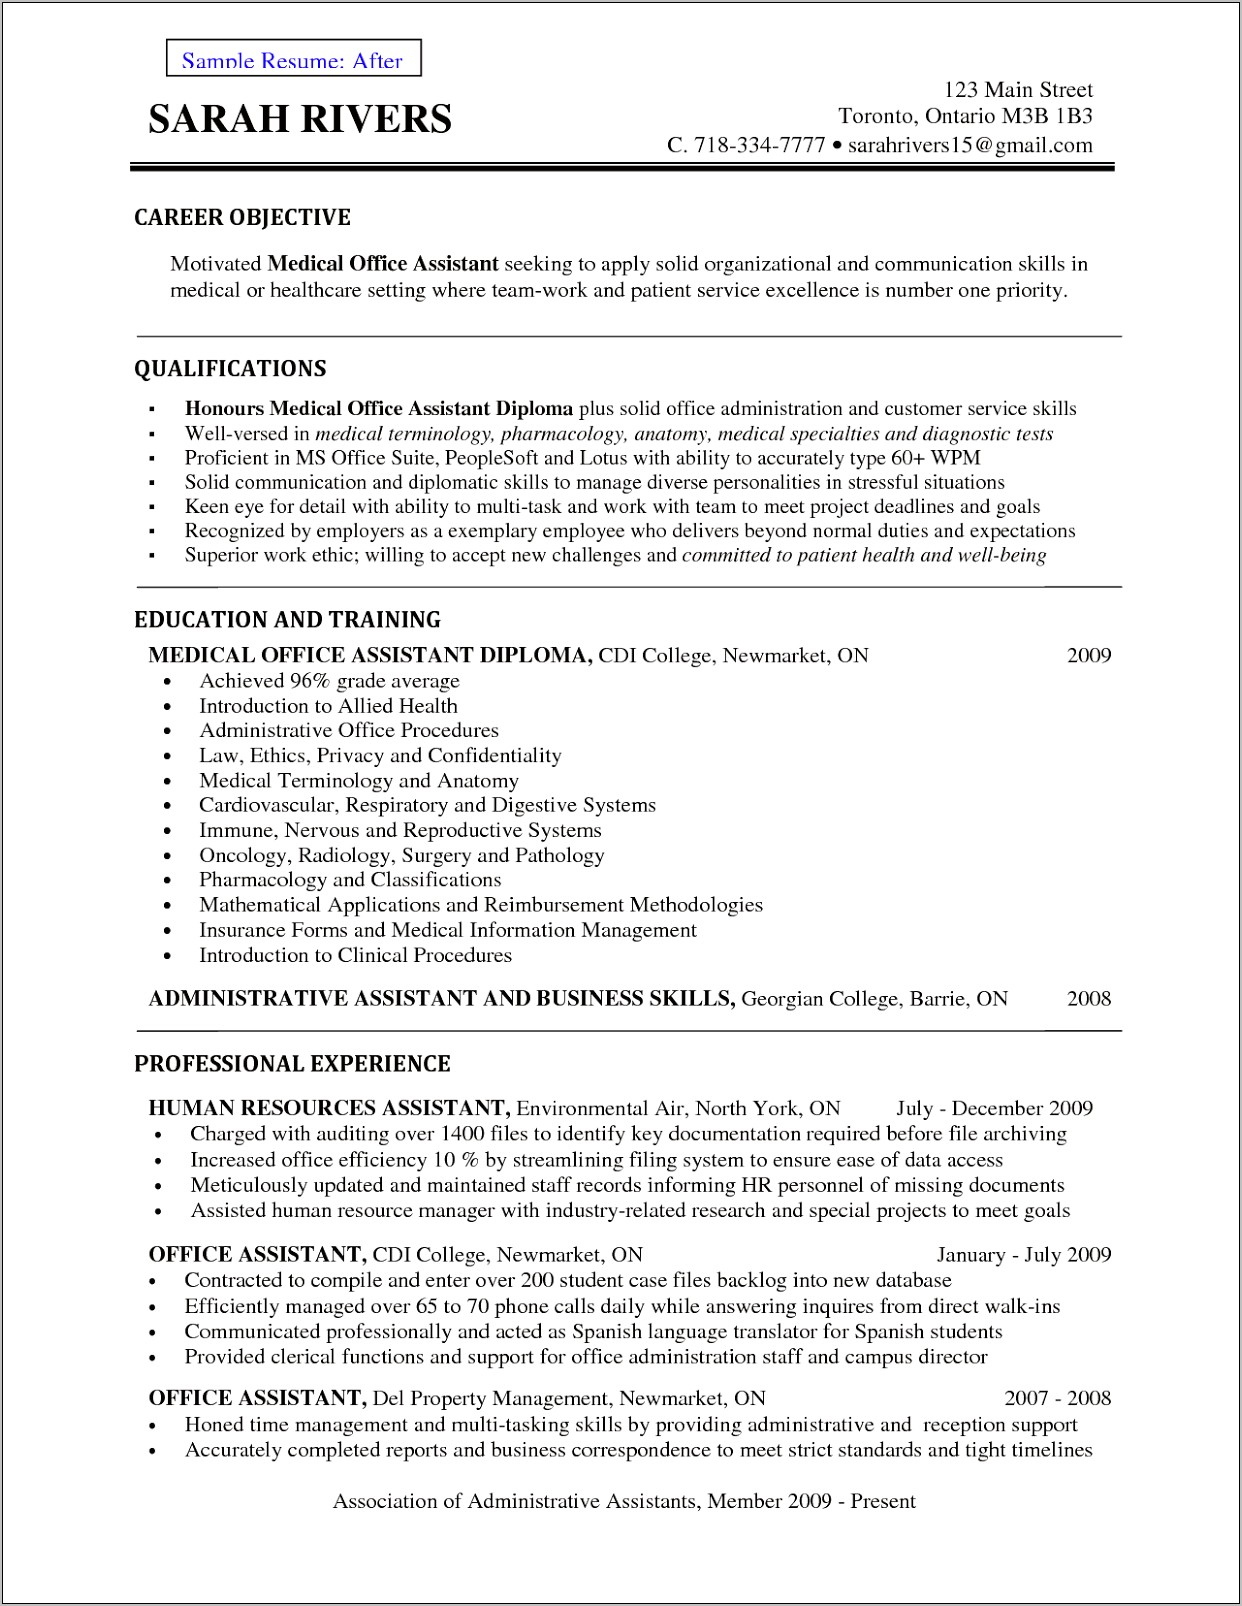 Examples Of Career Objectives For A Resume